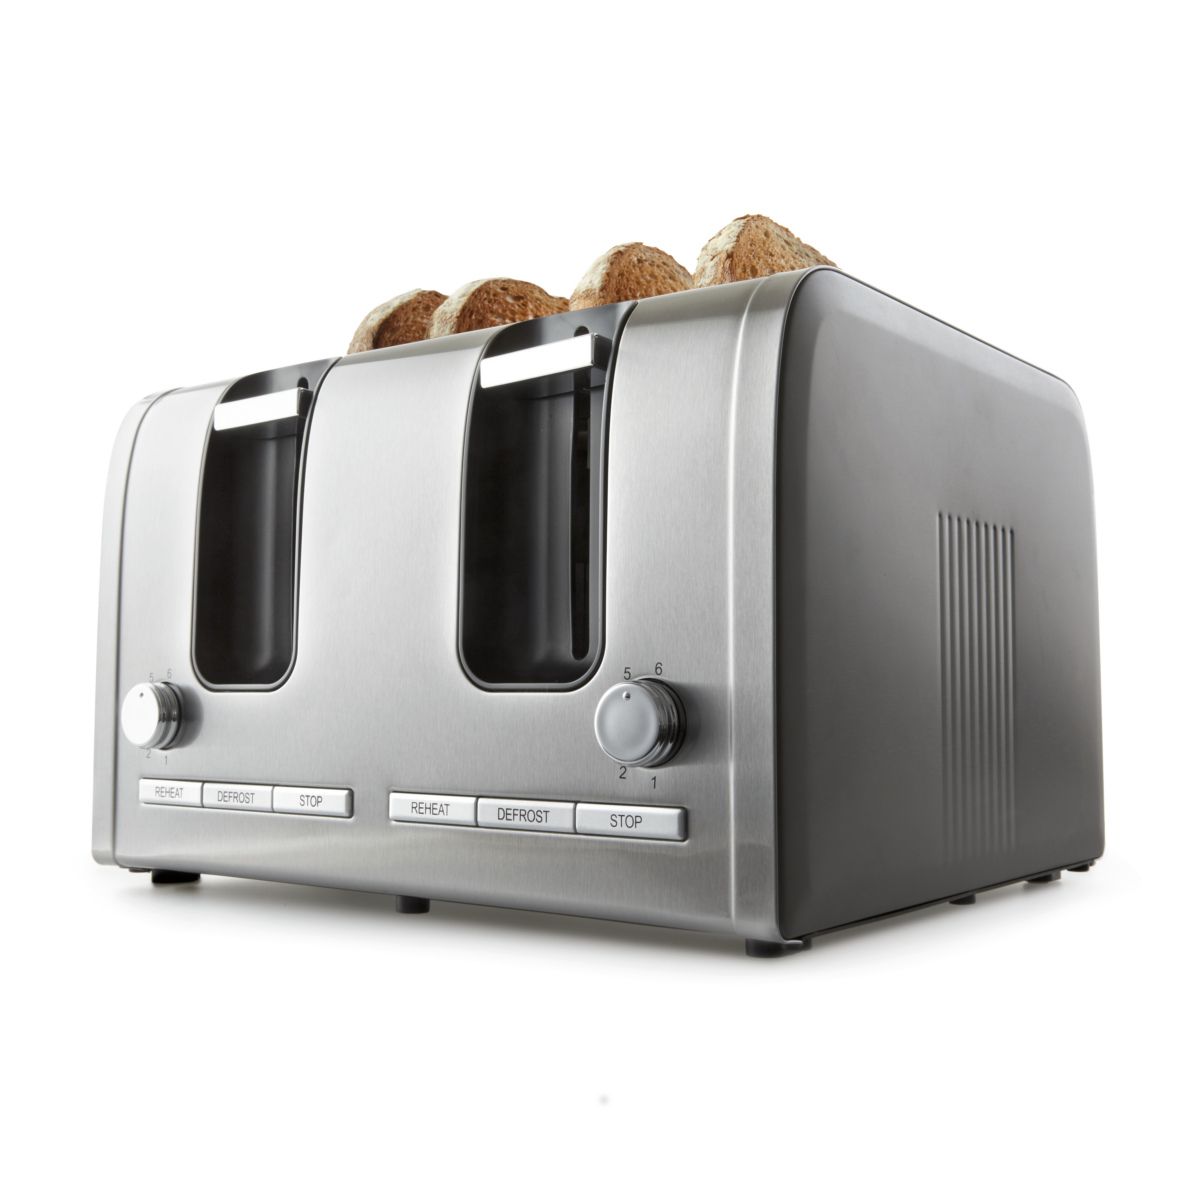 4 Slice Stainless Steel Toaster - Charcoal